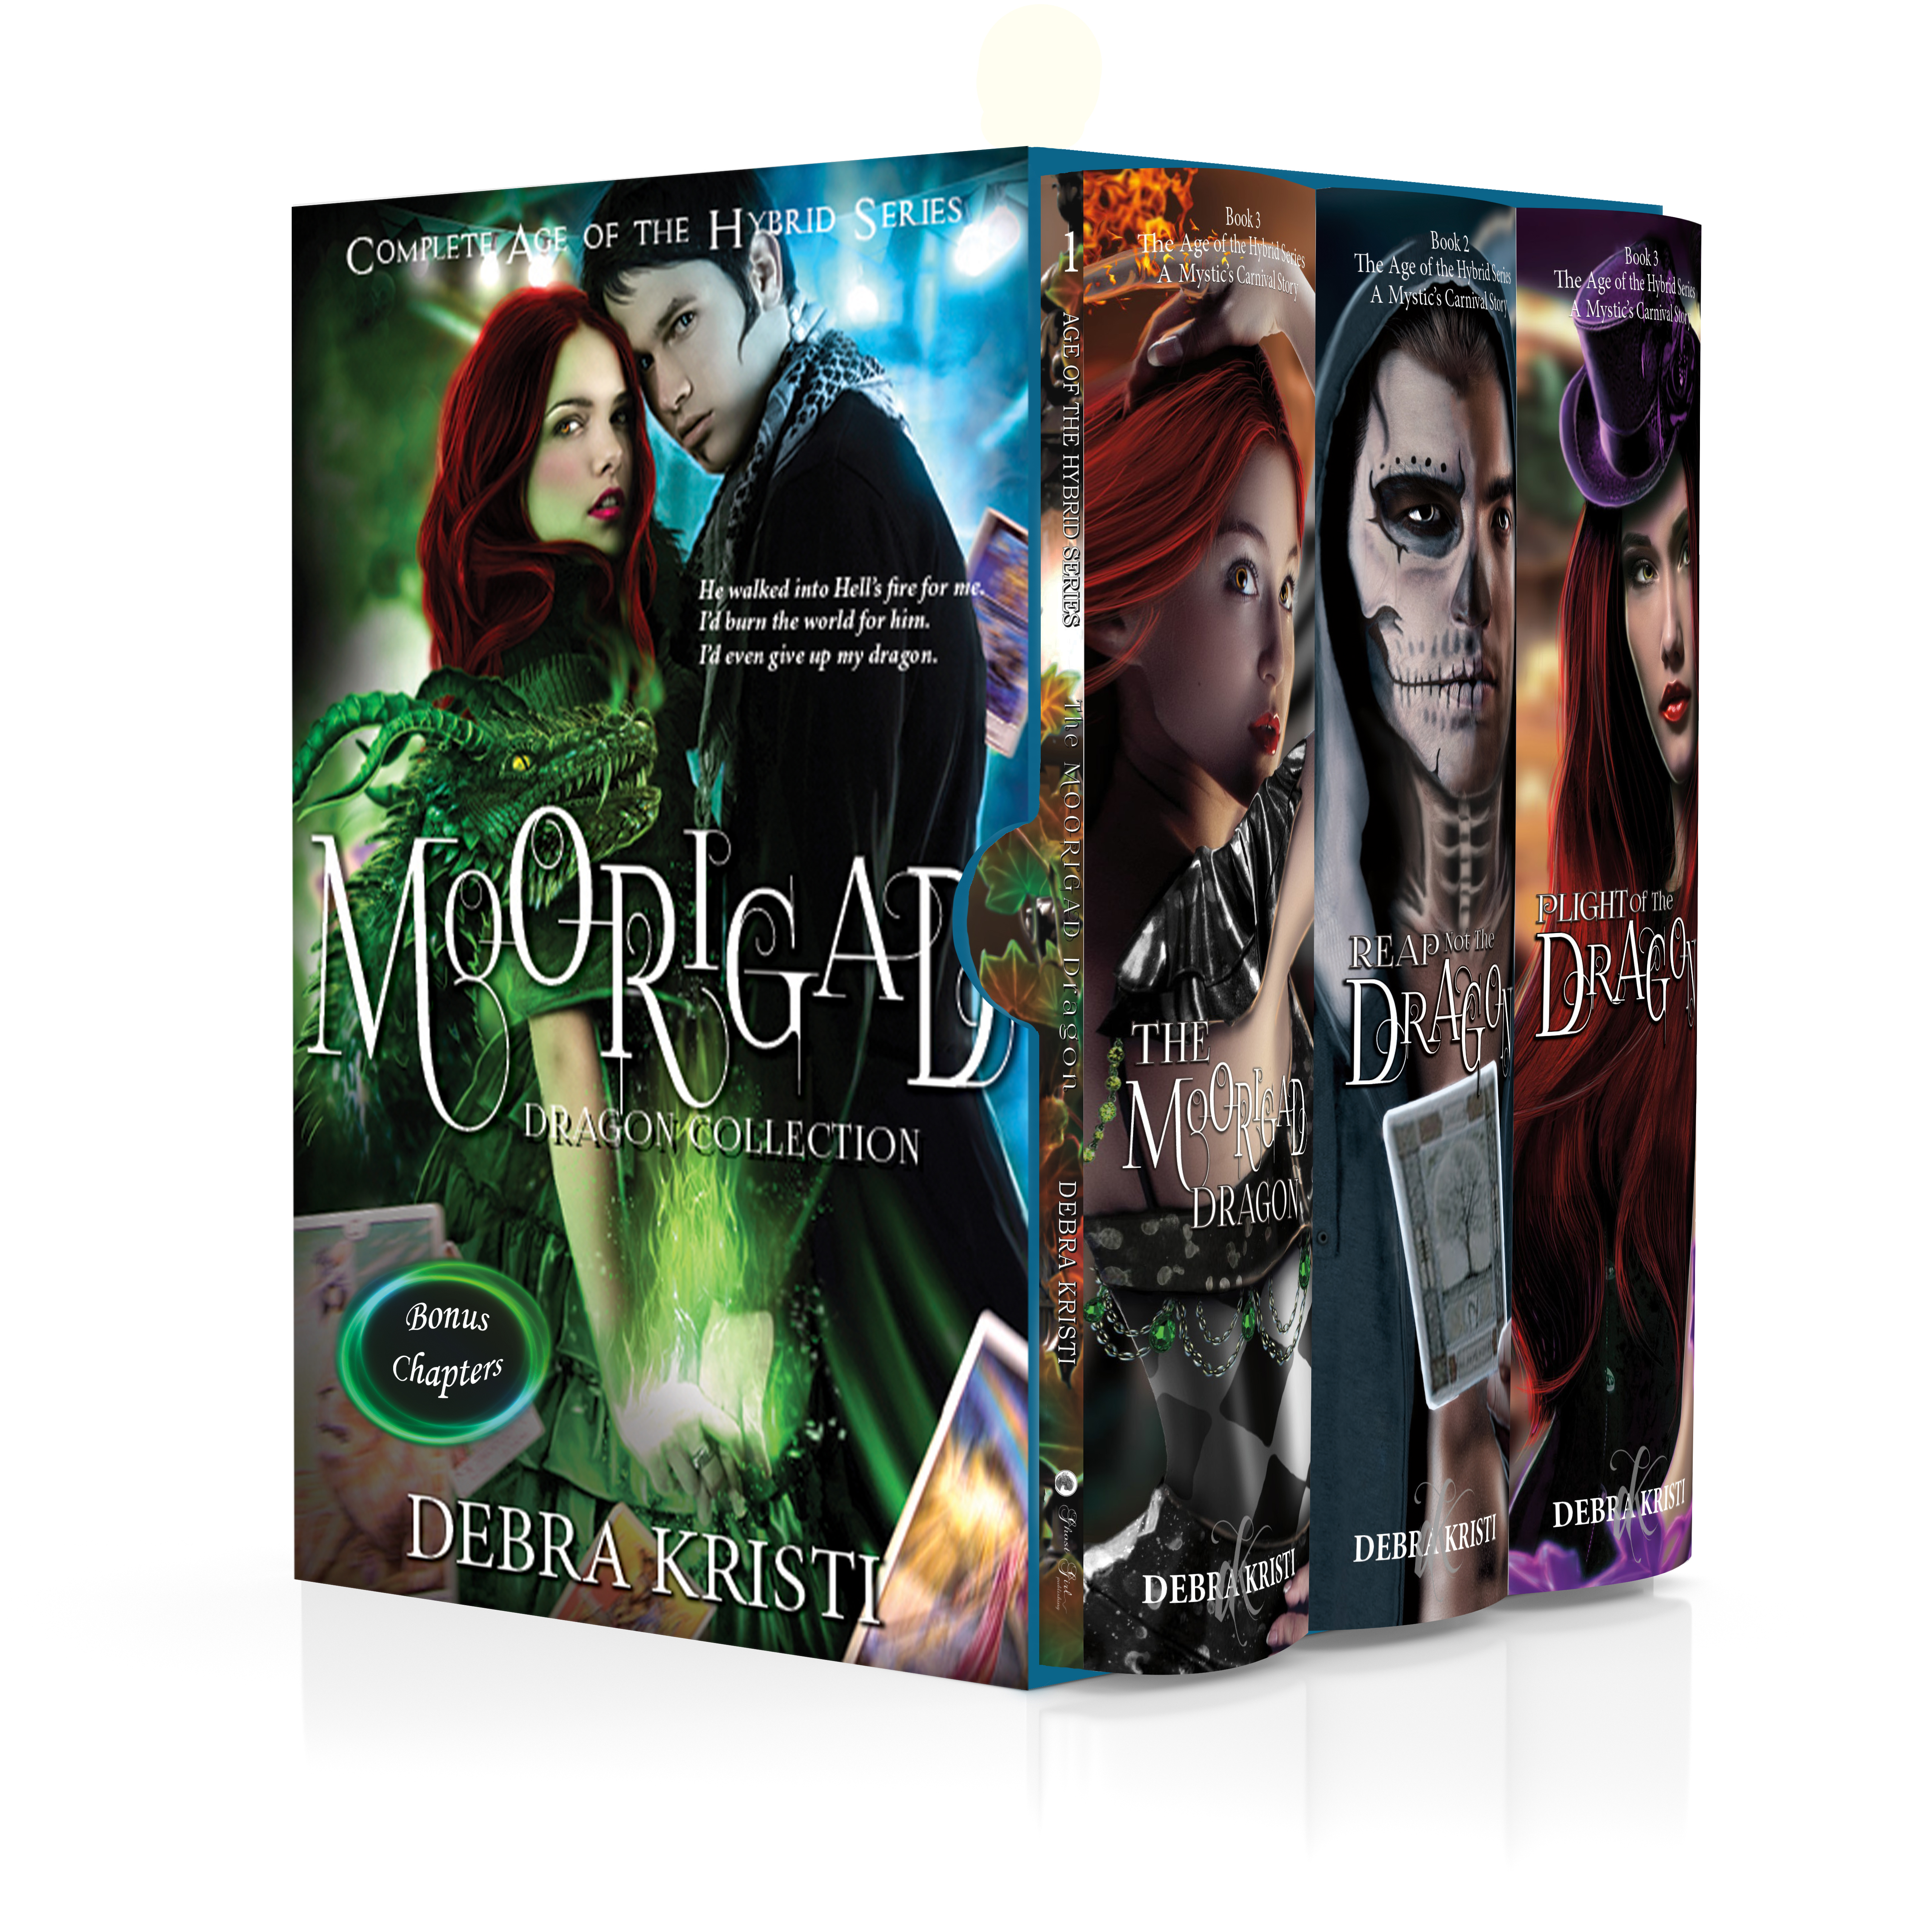 Moorigad Collection in Cover Reveal: Moorigad goes BIG by Mystic's Carnival